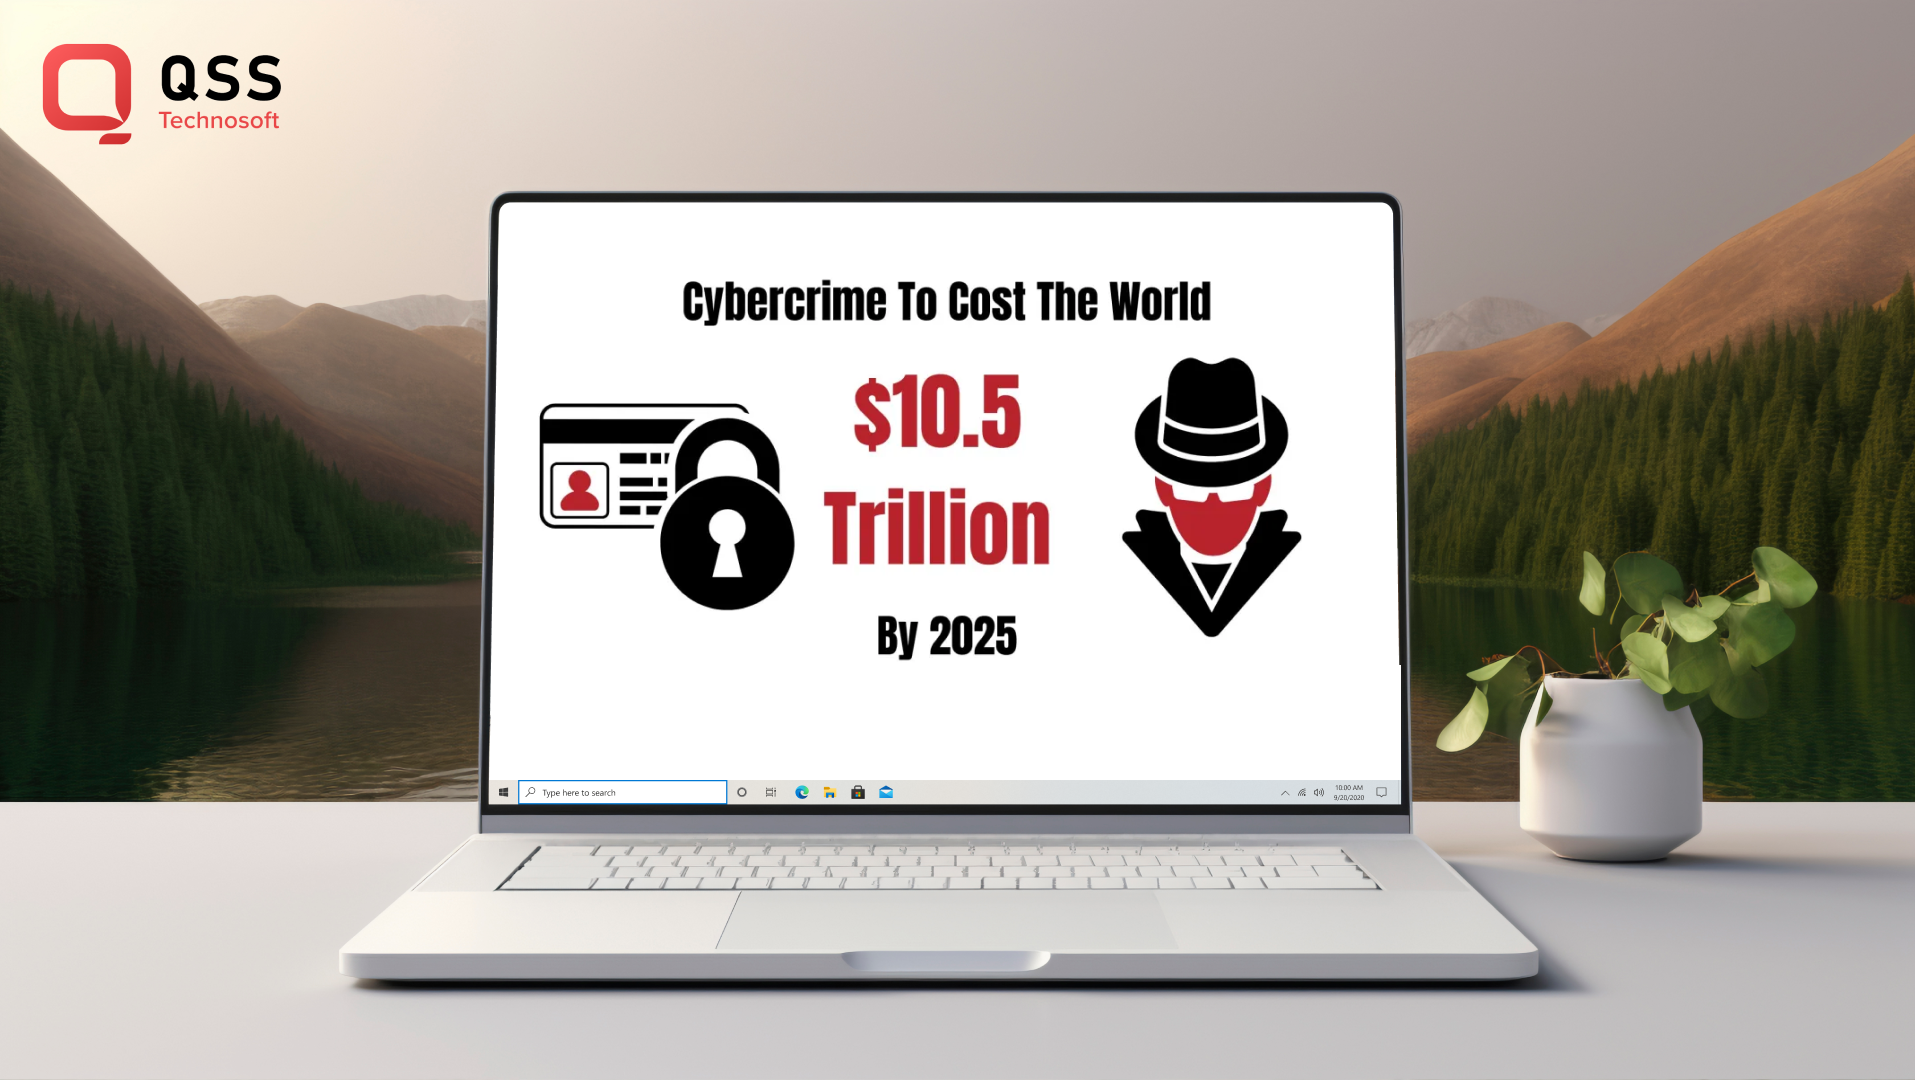 Cybercrime to Cost the world